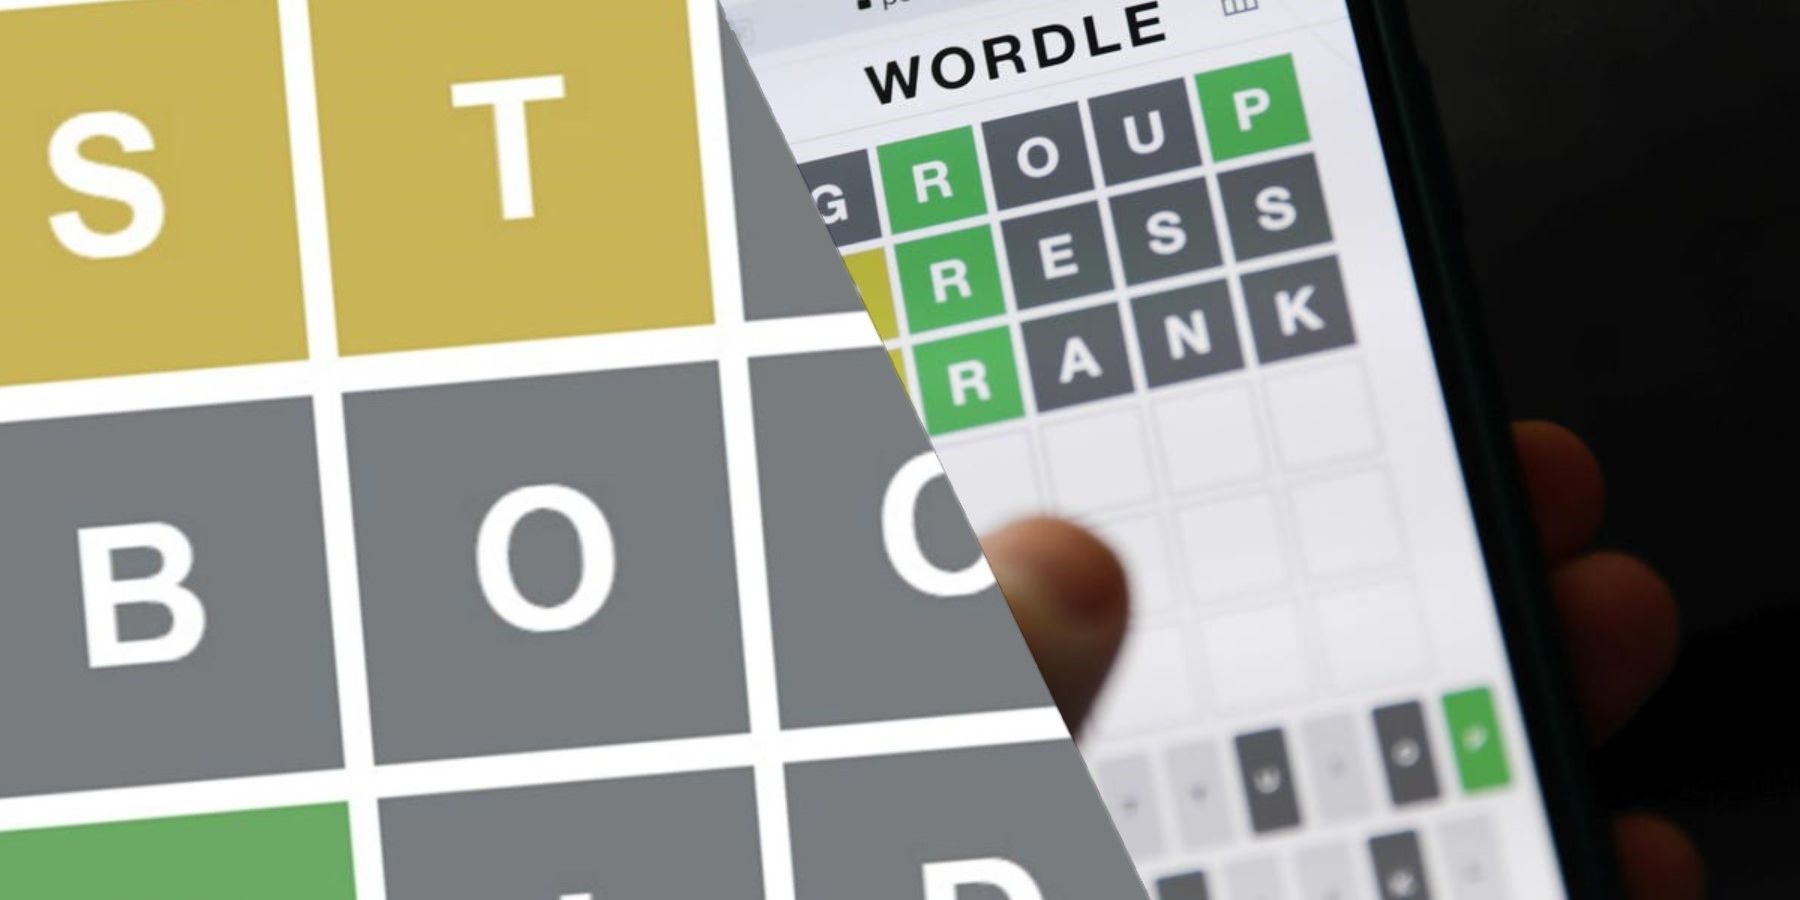 wordle limited archive fast games clones endless possibilities words new rules limit of one word per day replayability